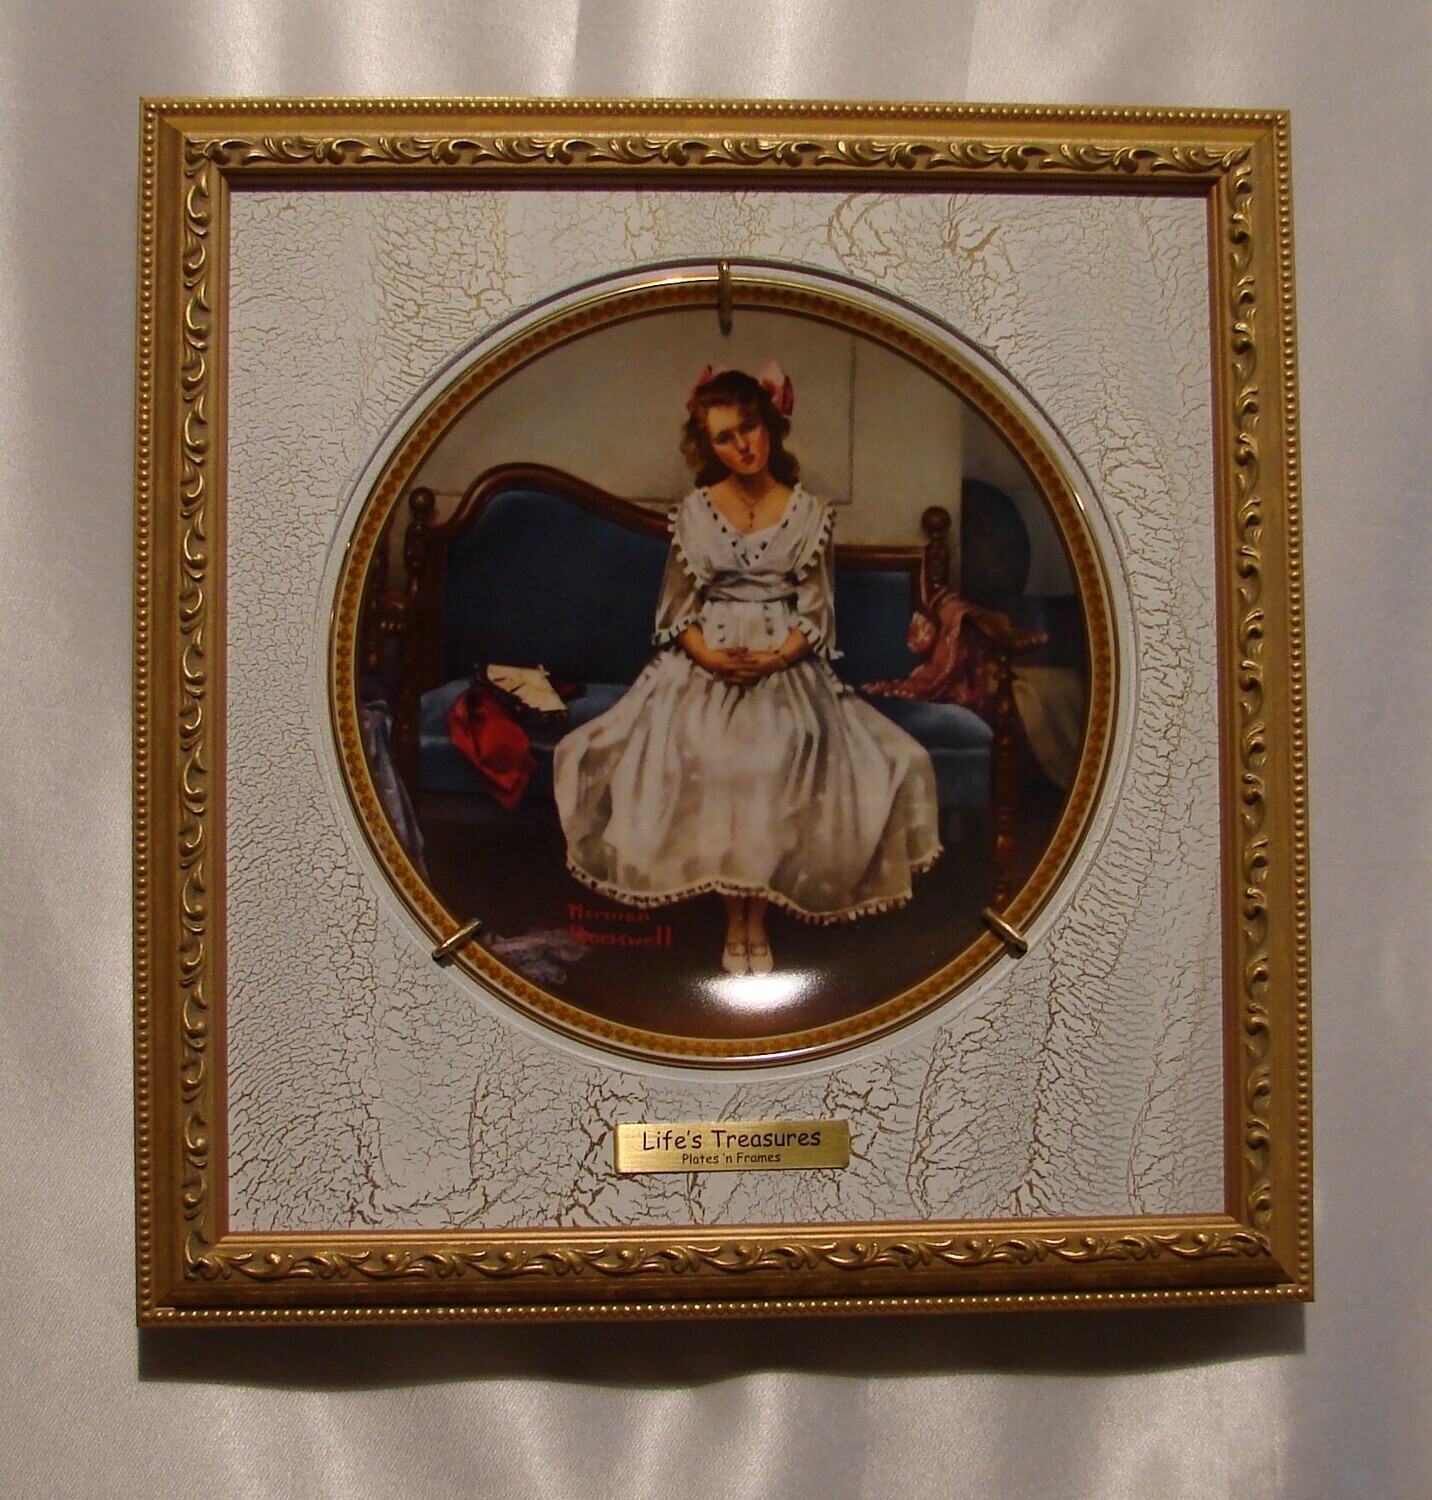 DB Small gold collector plate frame Norman Rockwell plate